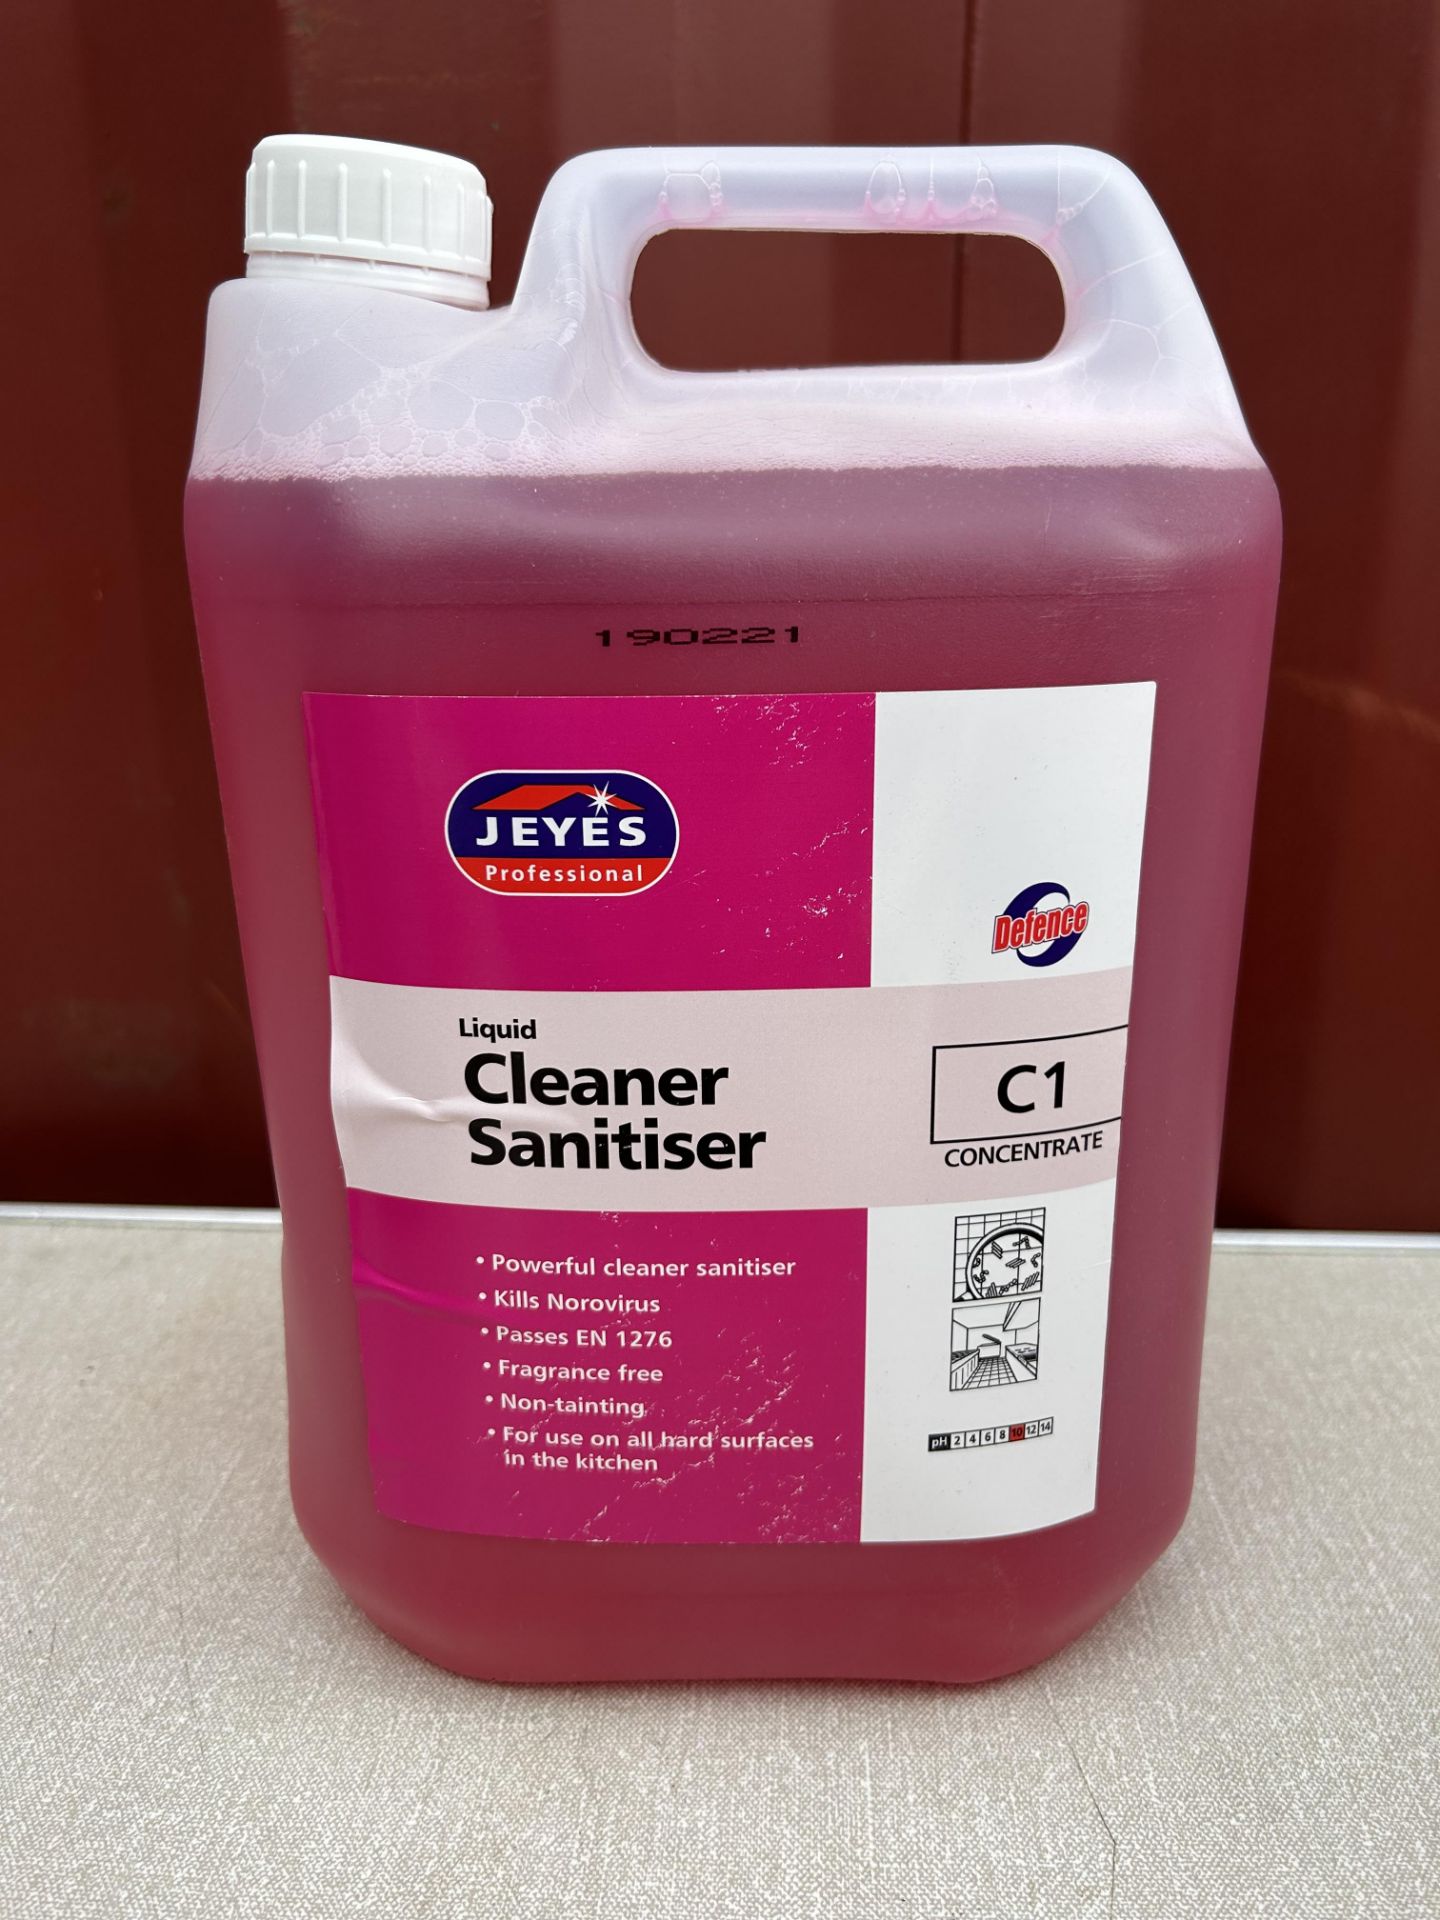 4x JEYES LIQUID CLEANER SANITISER C1 CONCENTRATE - 5L BRAND NEW